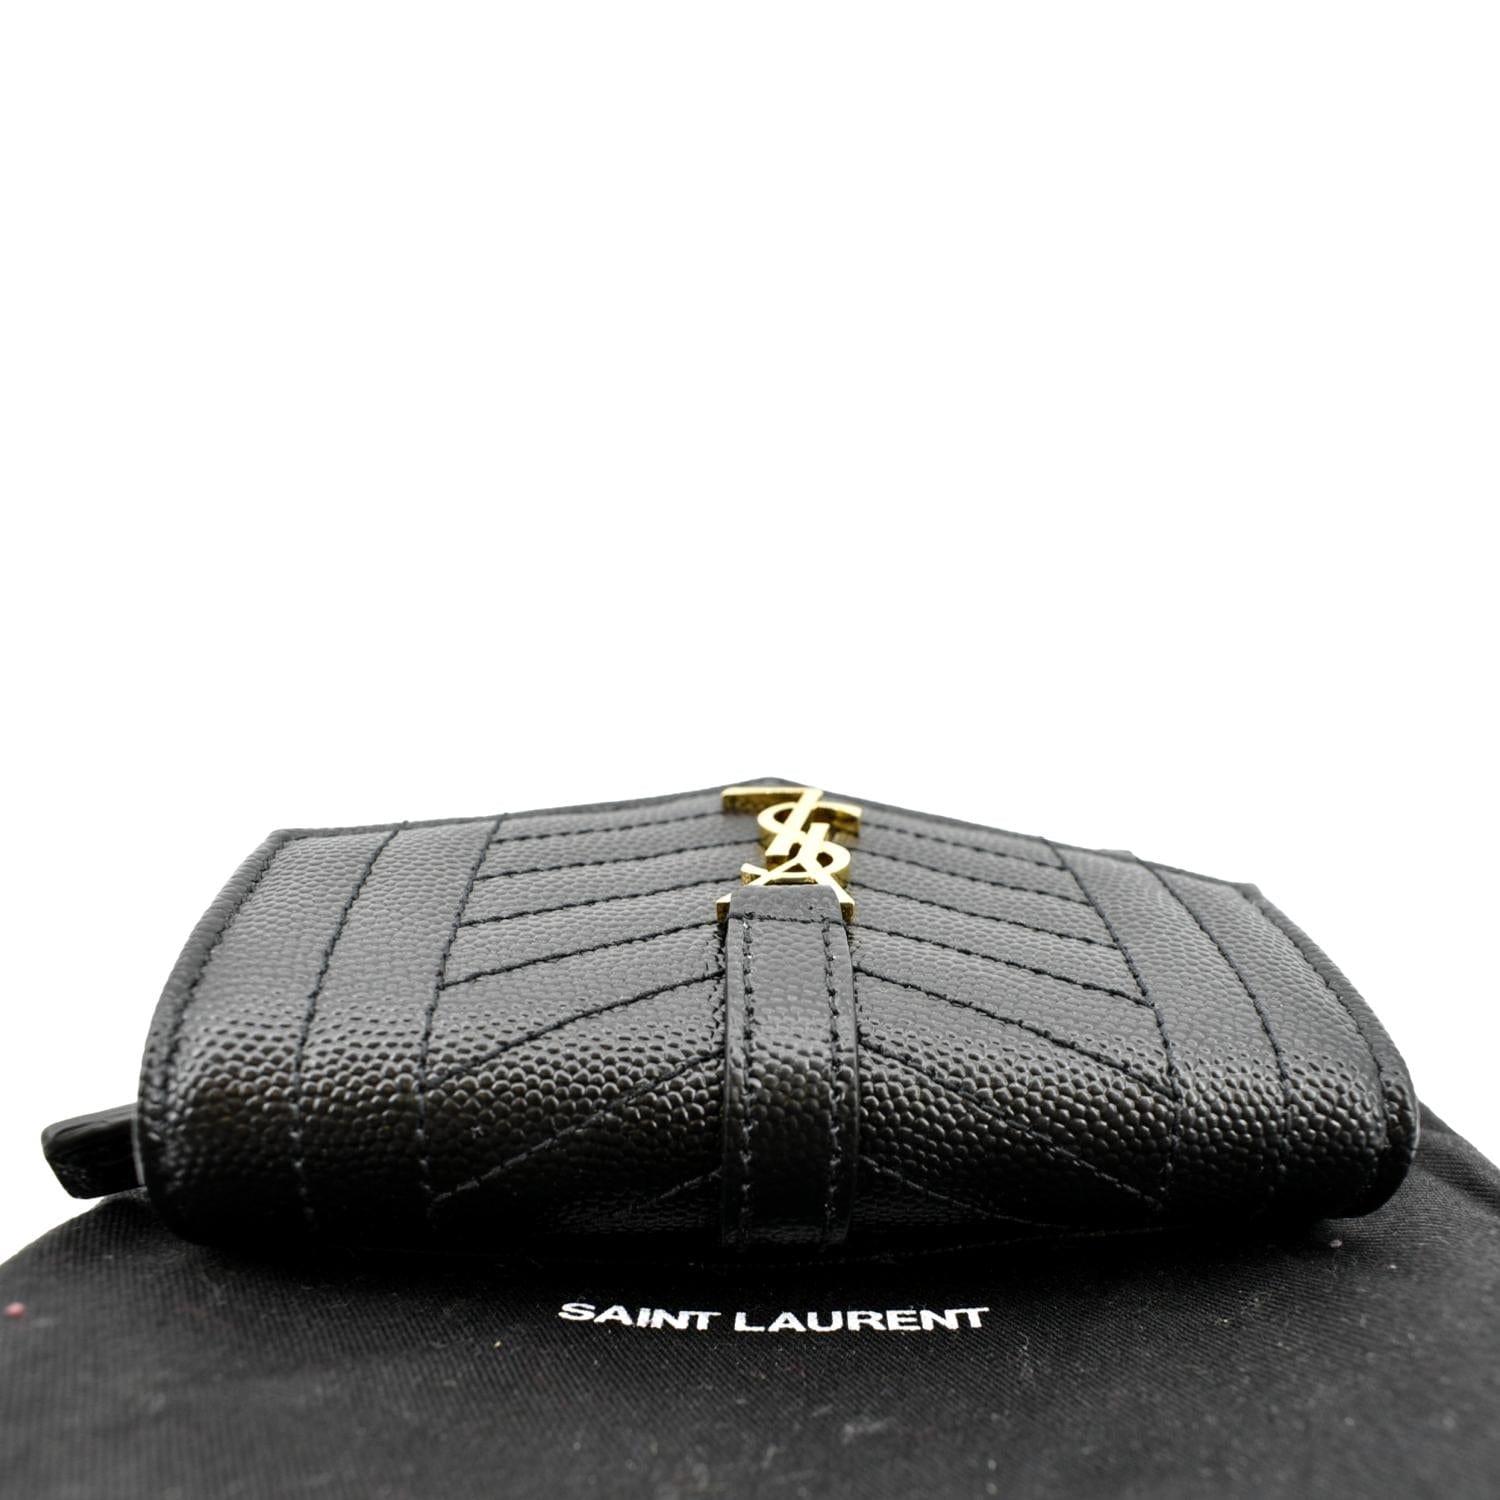 mini gaby quilted leather micro bag on chain